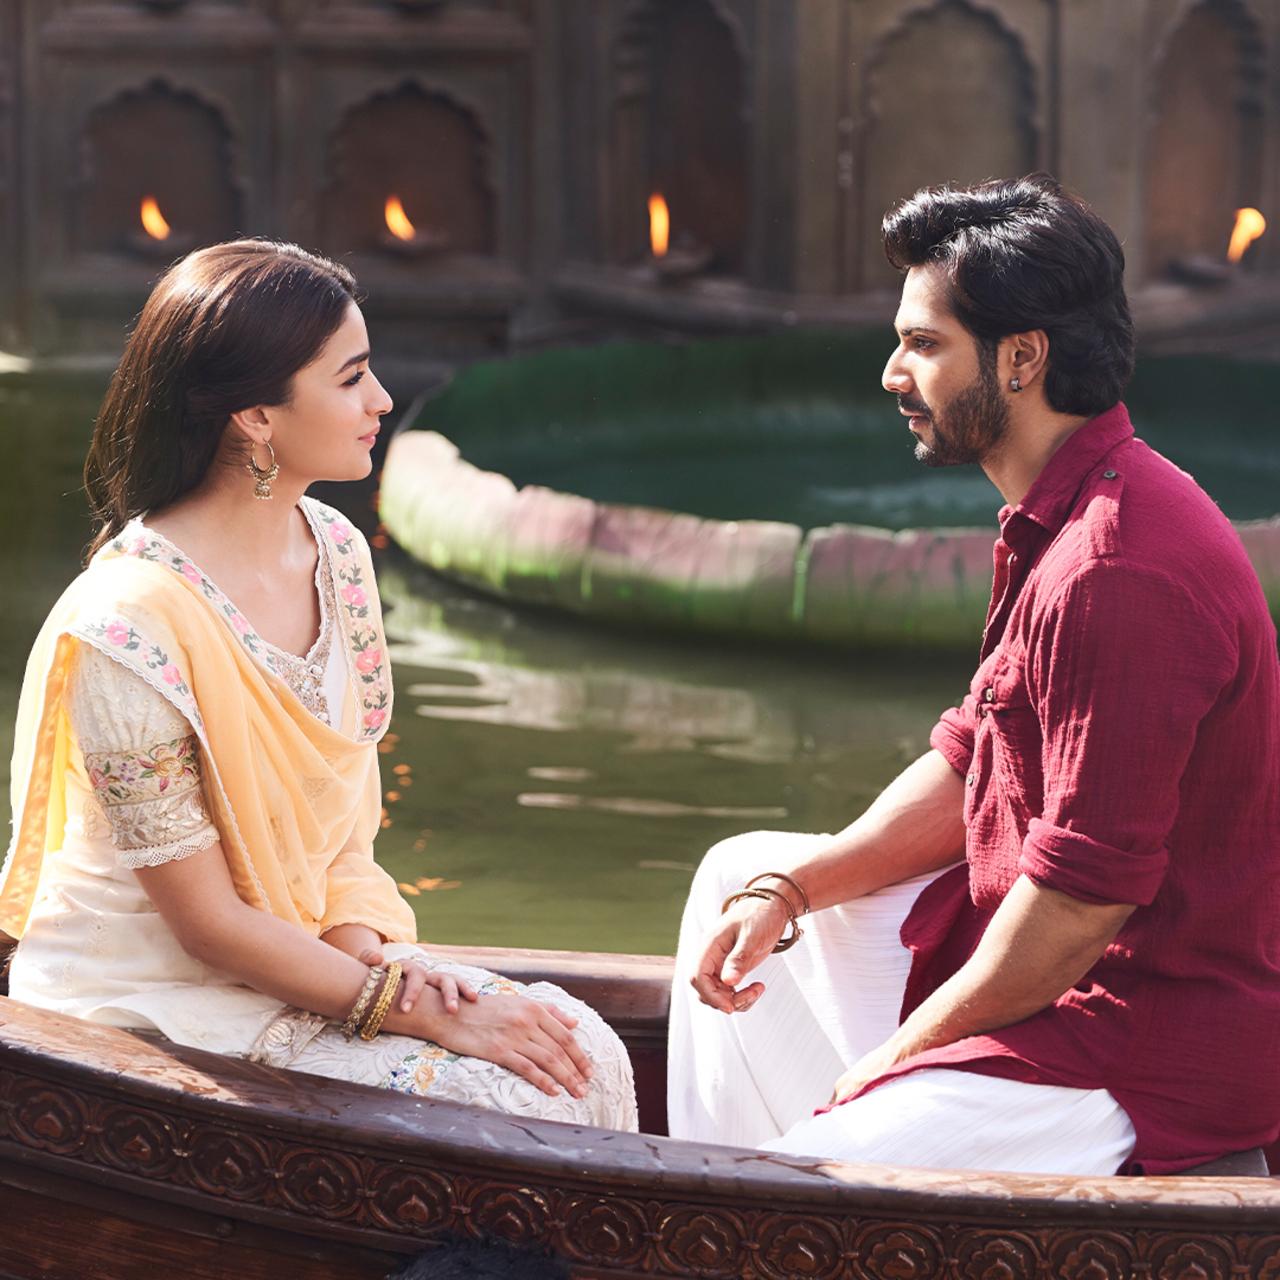 Kalank
Set in 1945's pre-independent India, the affluent Chaudhry family's world collides with Hira Mandi's spirited underbelly when Roop Chaudhry meets the audacious Zafar. Their encounter reveals hidden truths and age-old secrets, risking upheaval in both realms